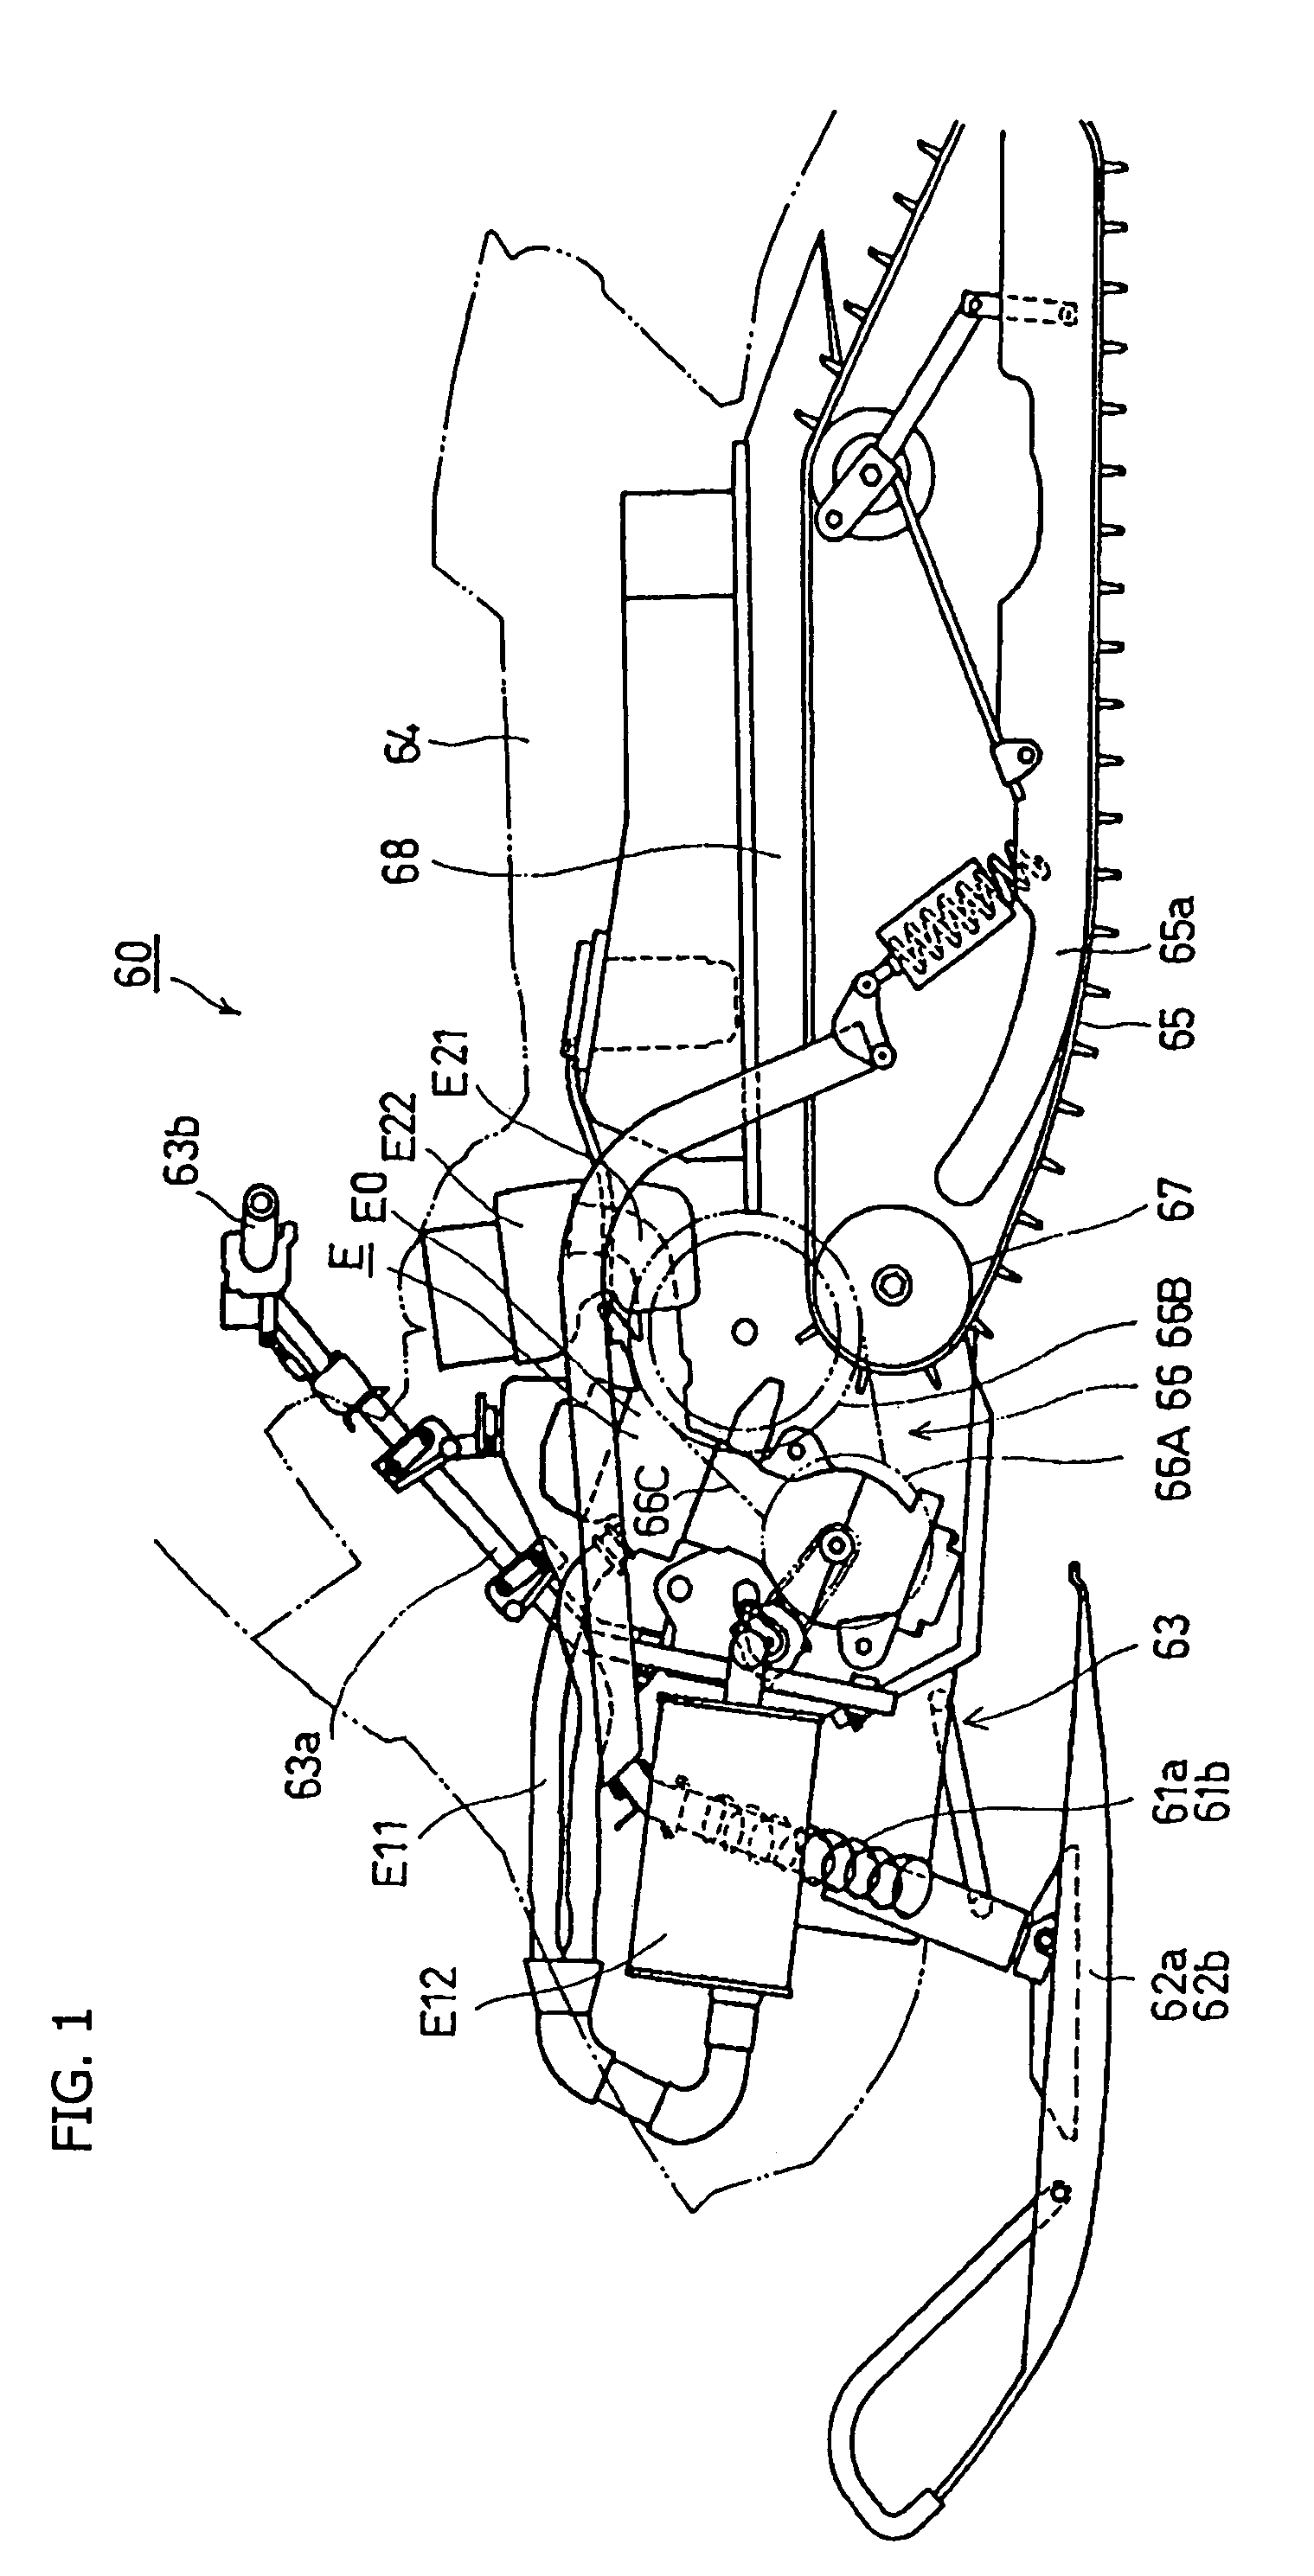 Snowmobile, and the arrangement of the engine and accessory components thereof